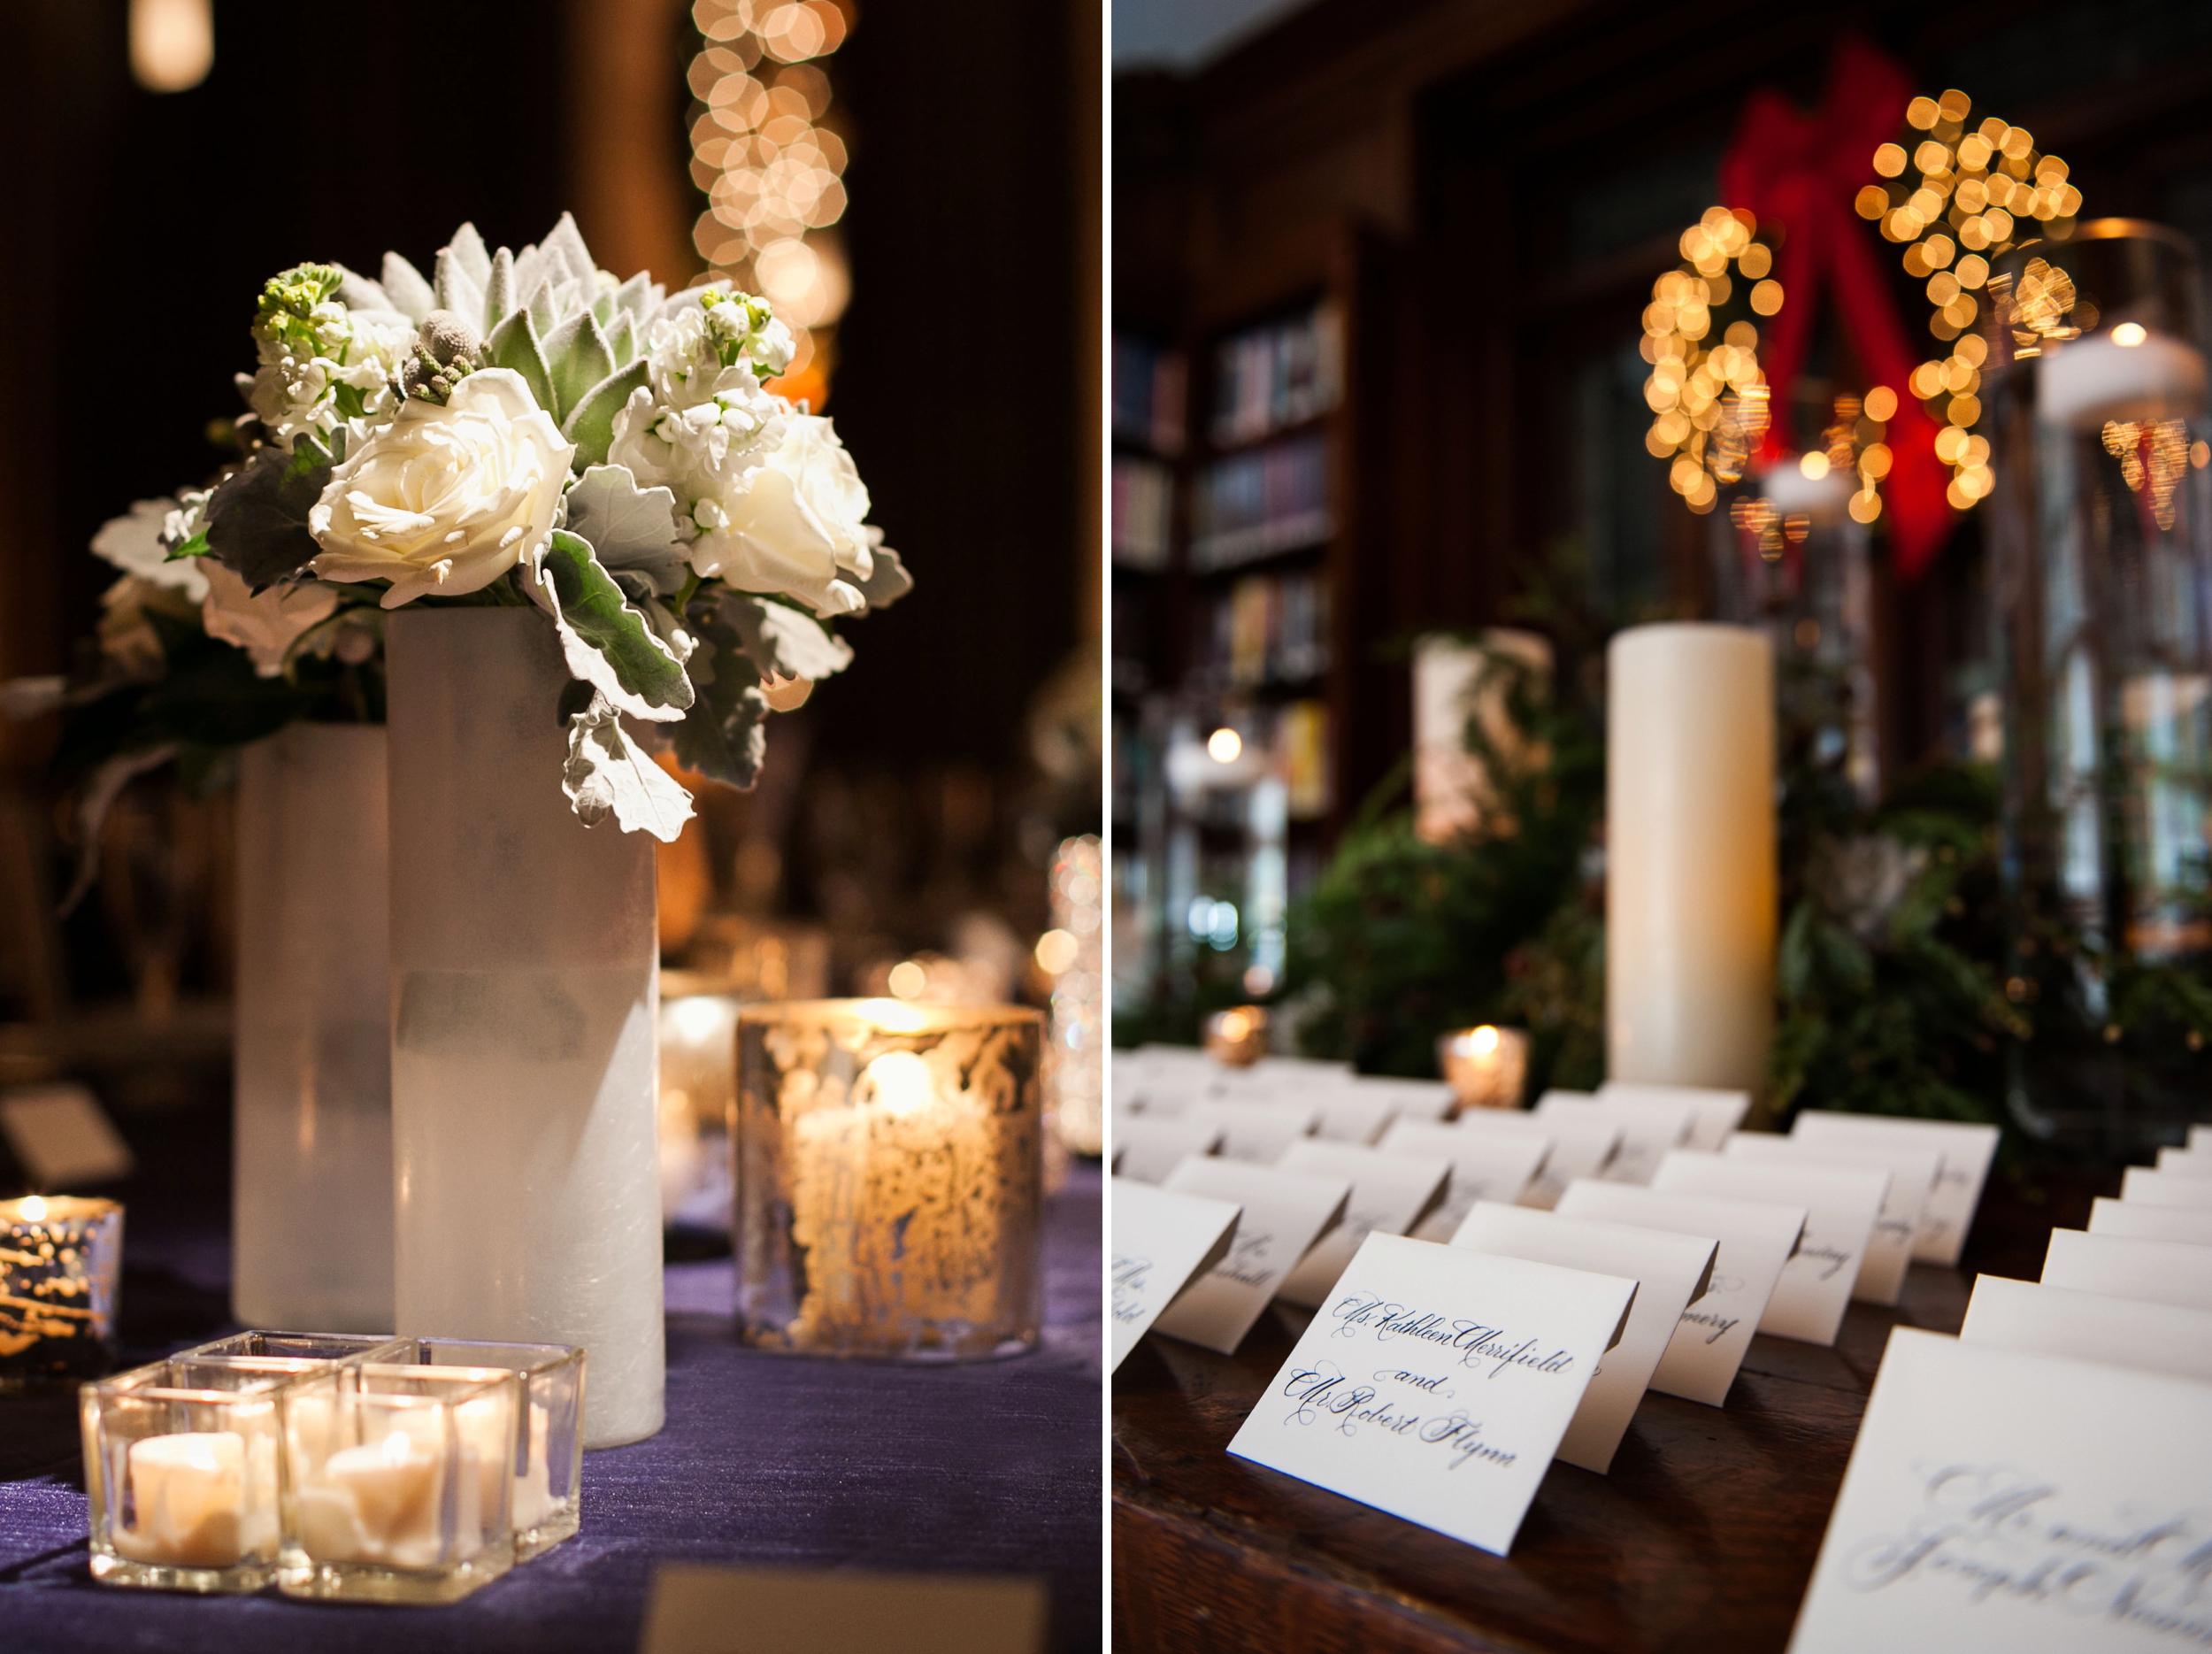 5 Reasons Why You Should Hire a Photographer for Your Corporate Holiday Party